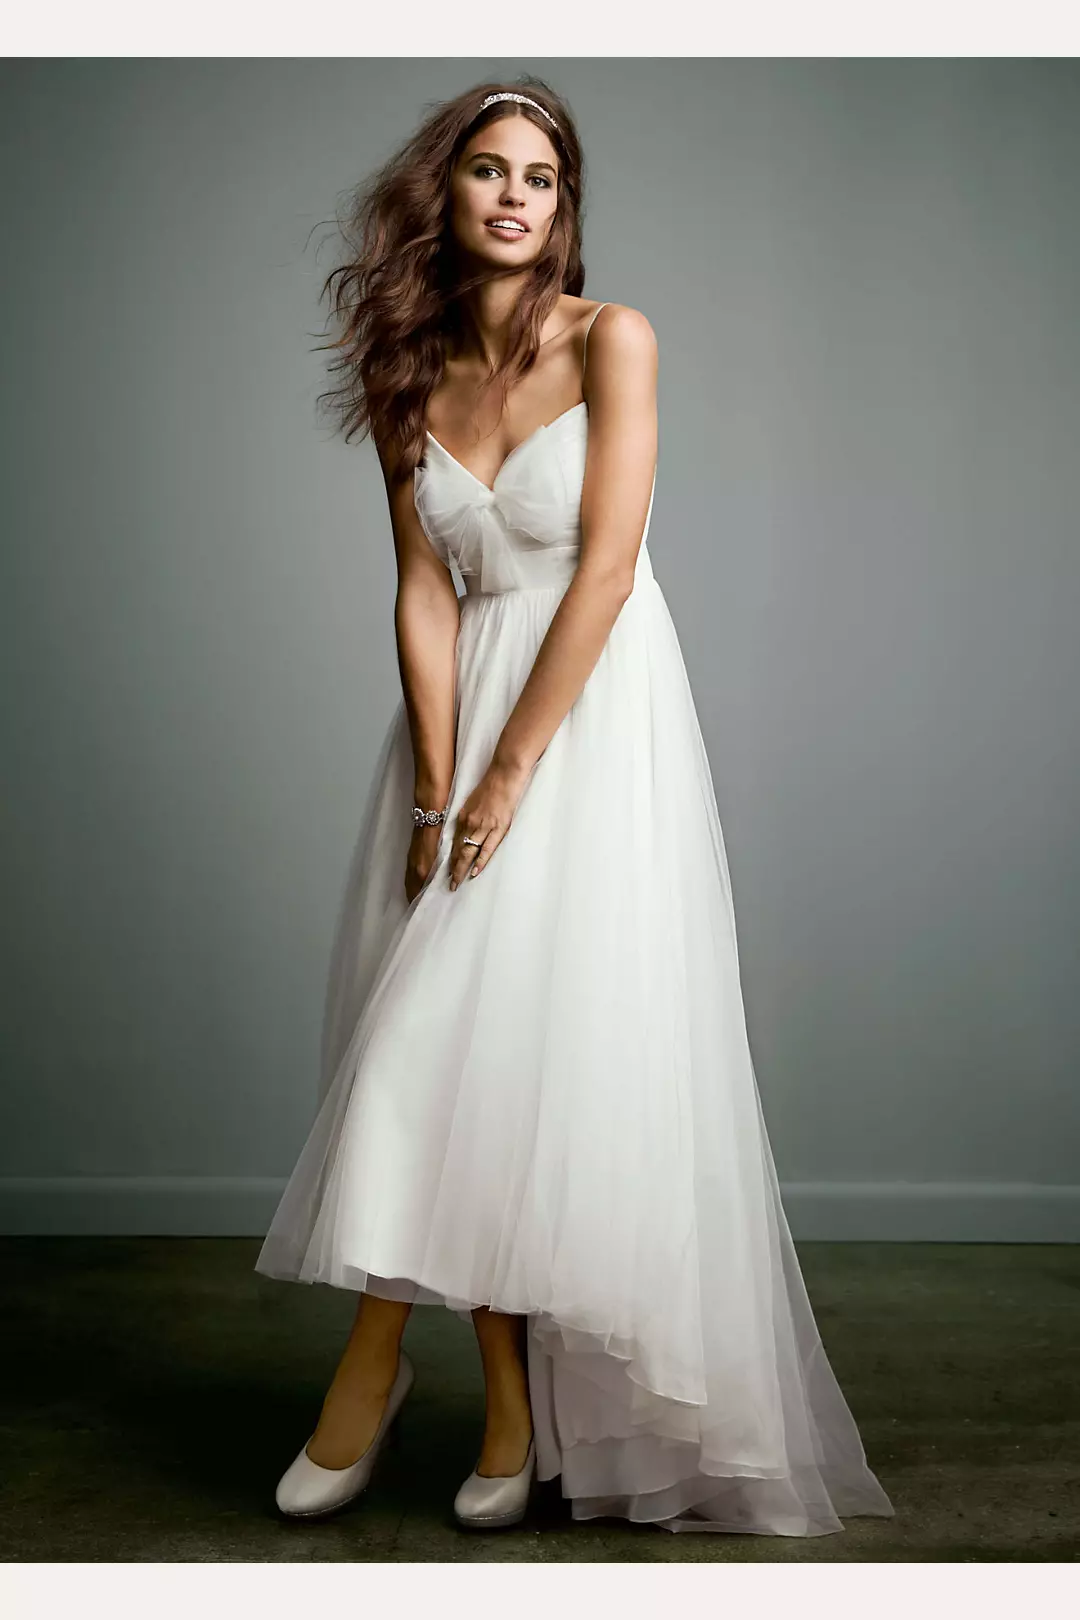 Tulle Over Chiffon High Low Dress with Bow Accent  Image